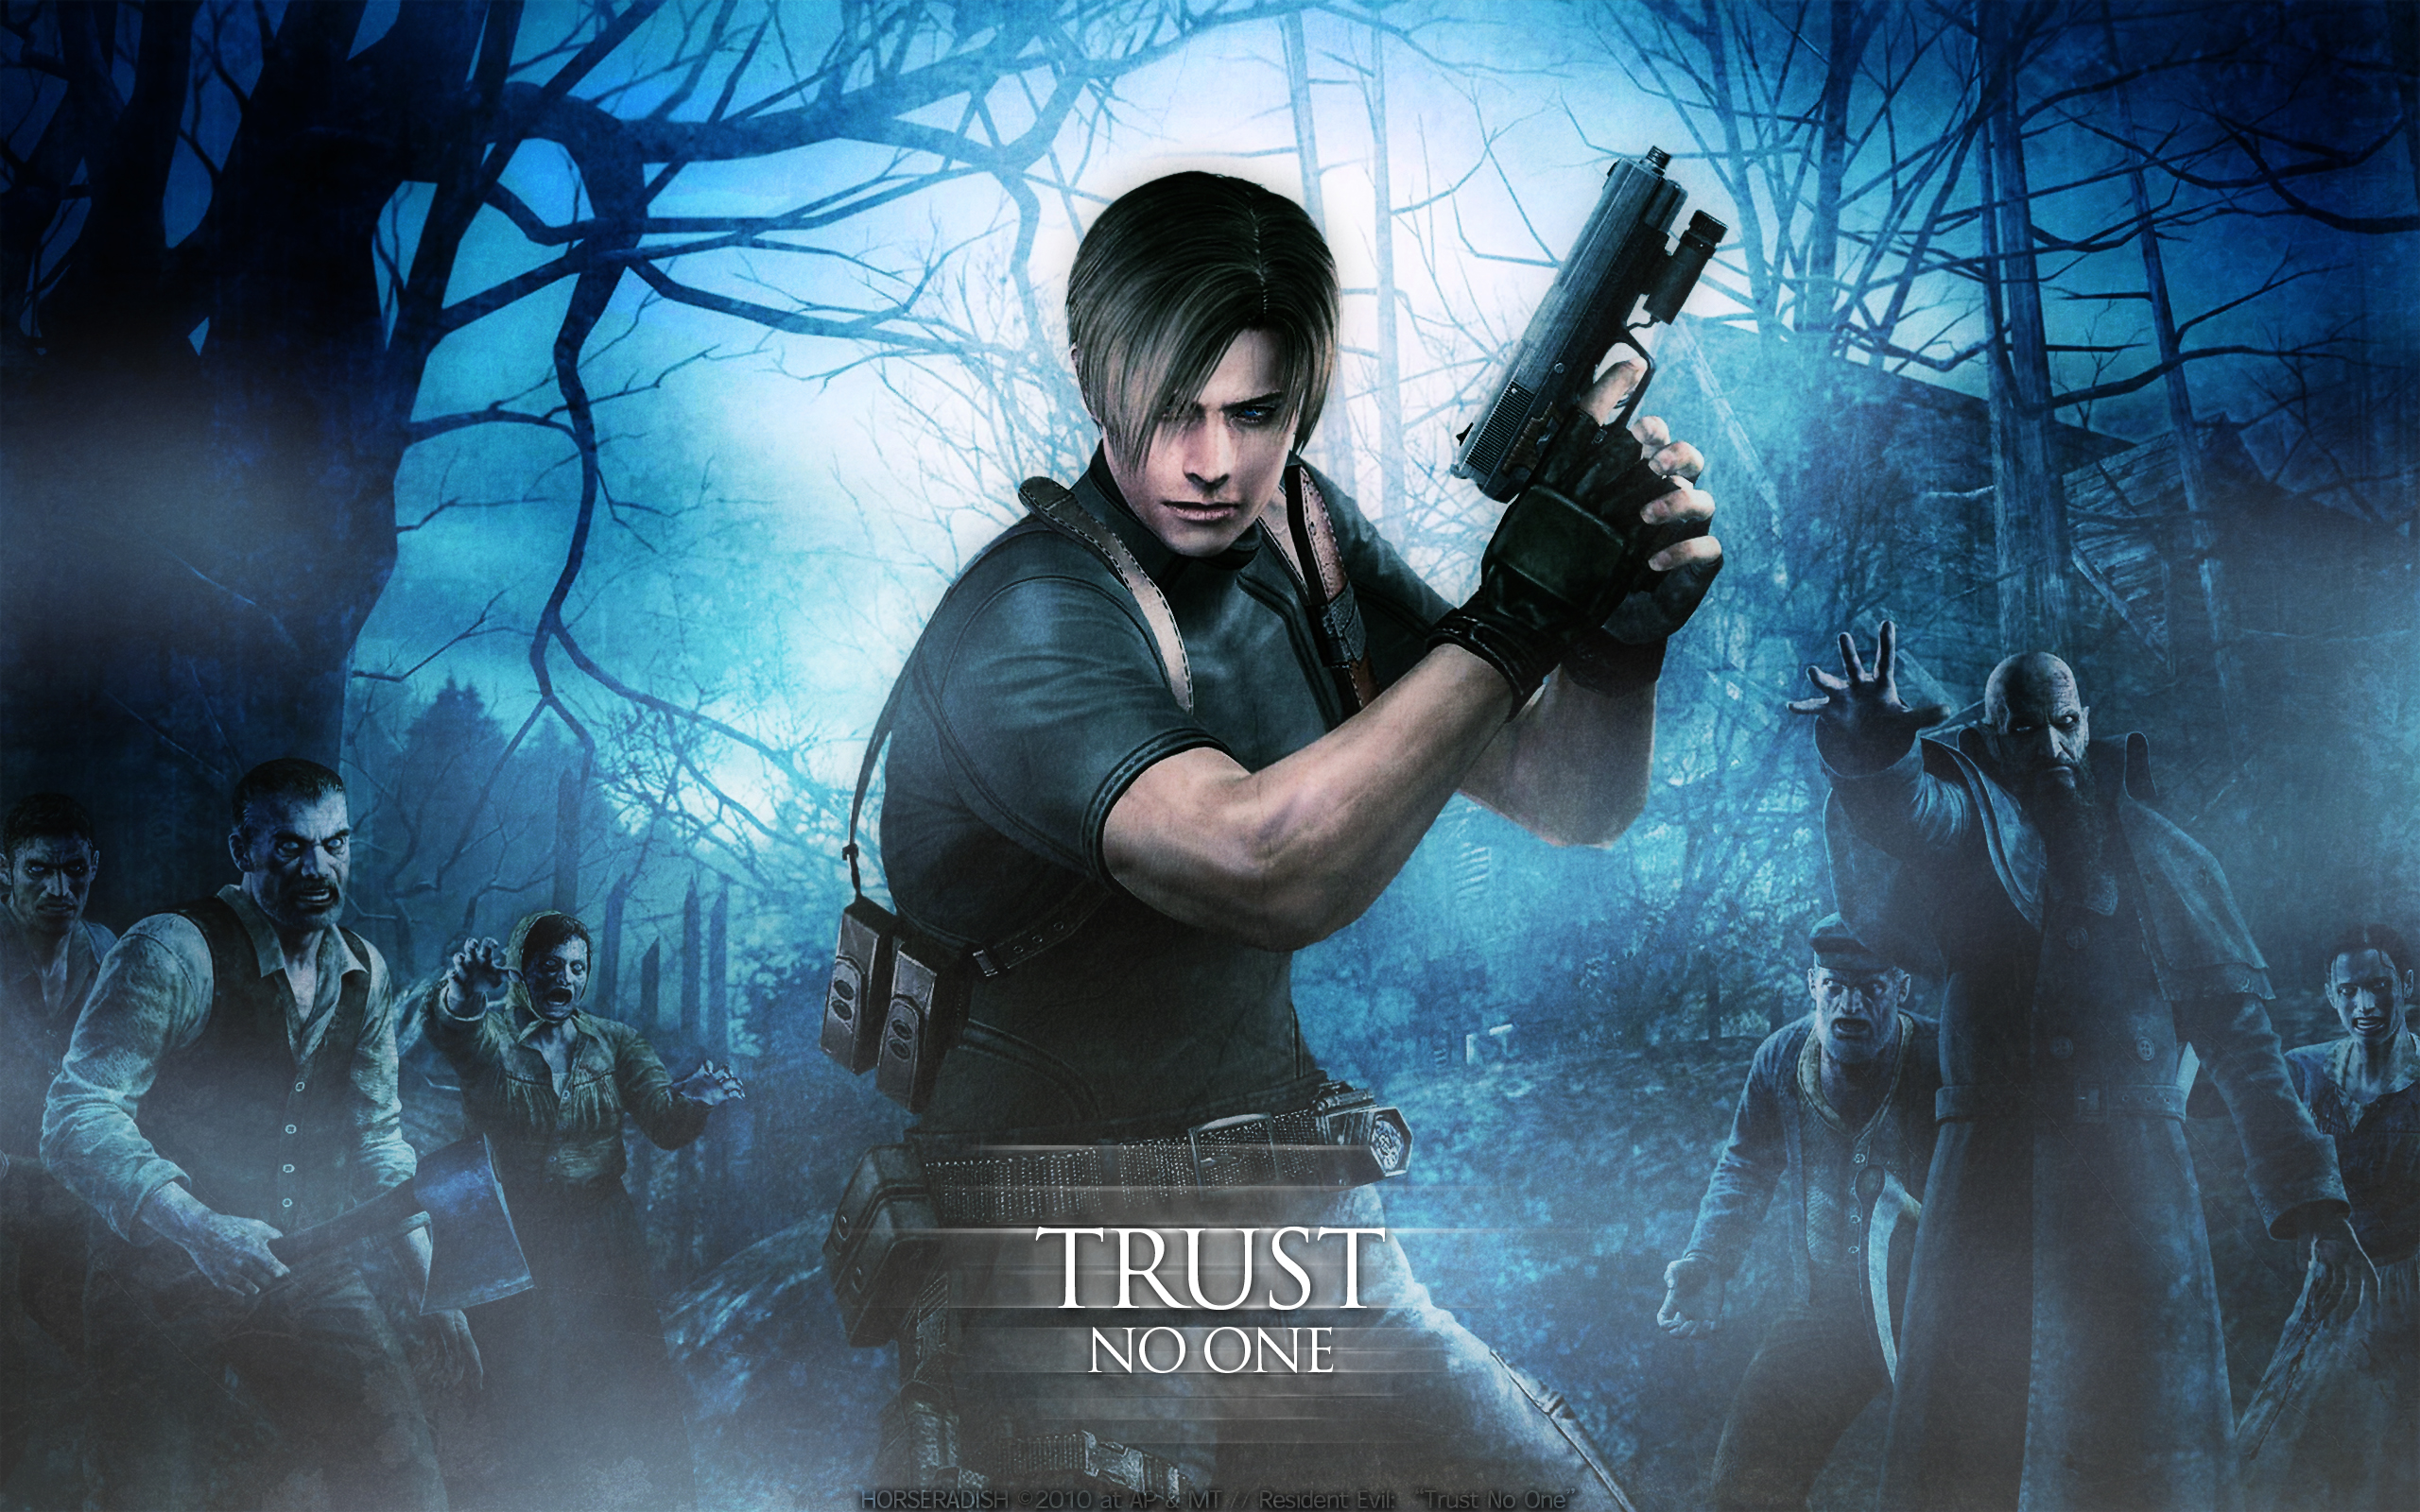 resident evil 8 free download for android